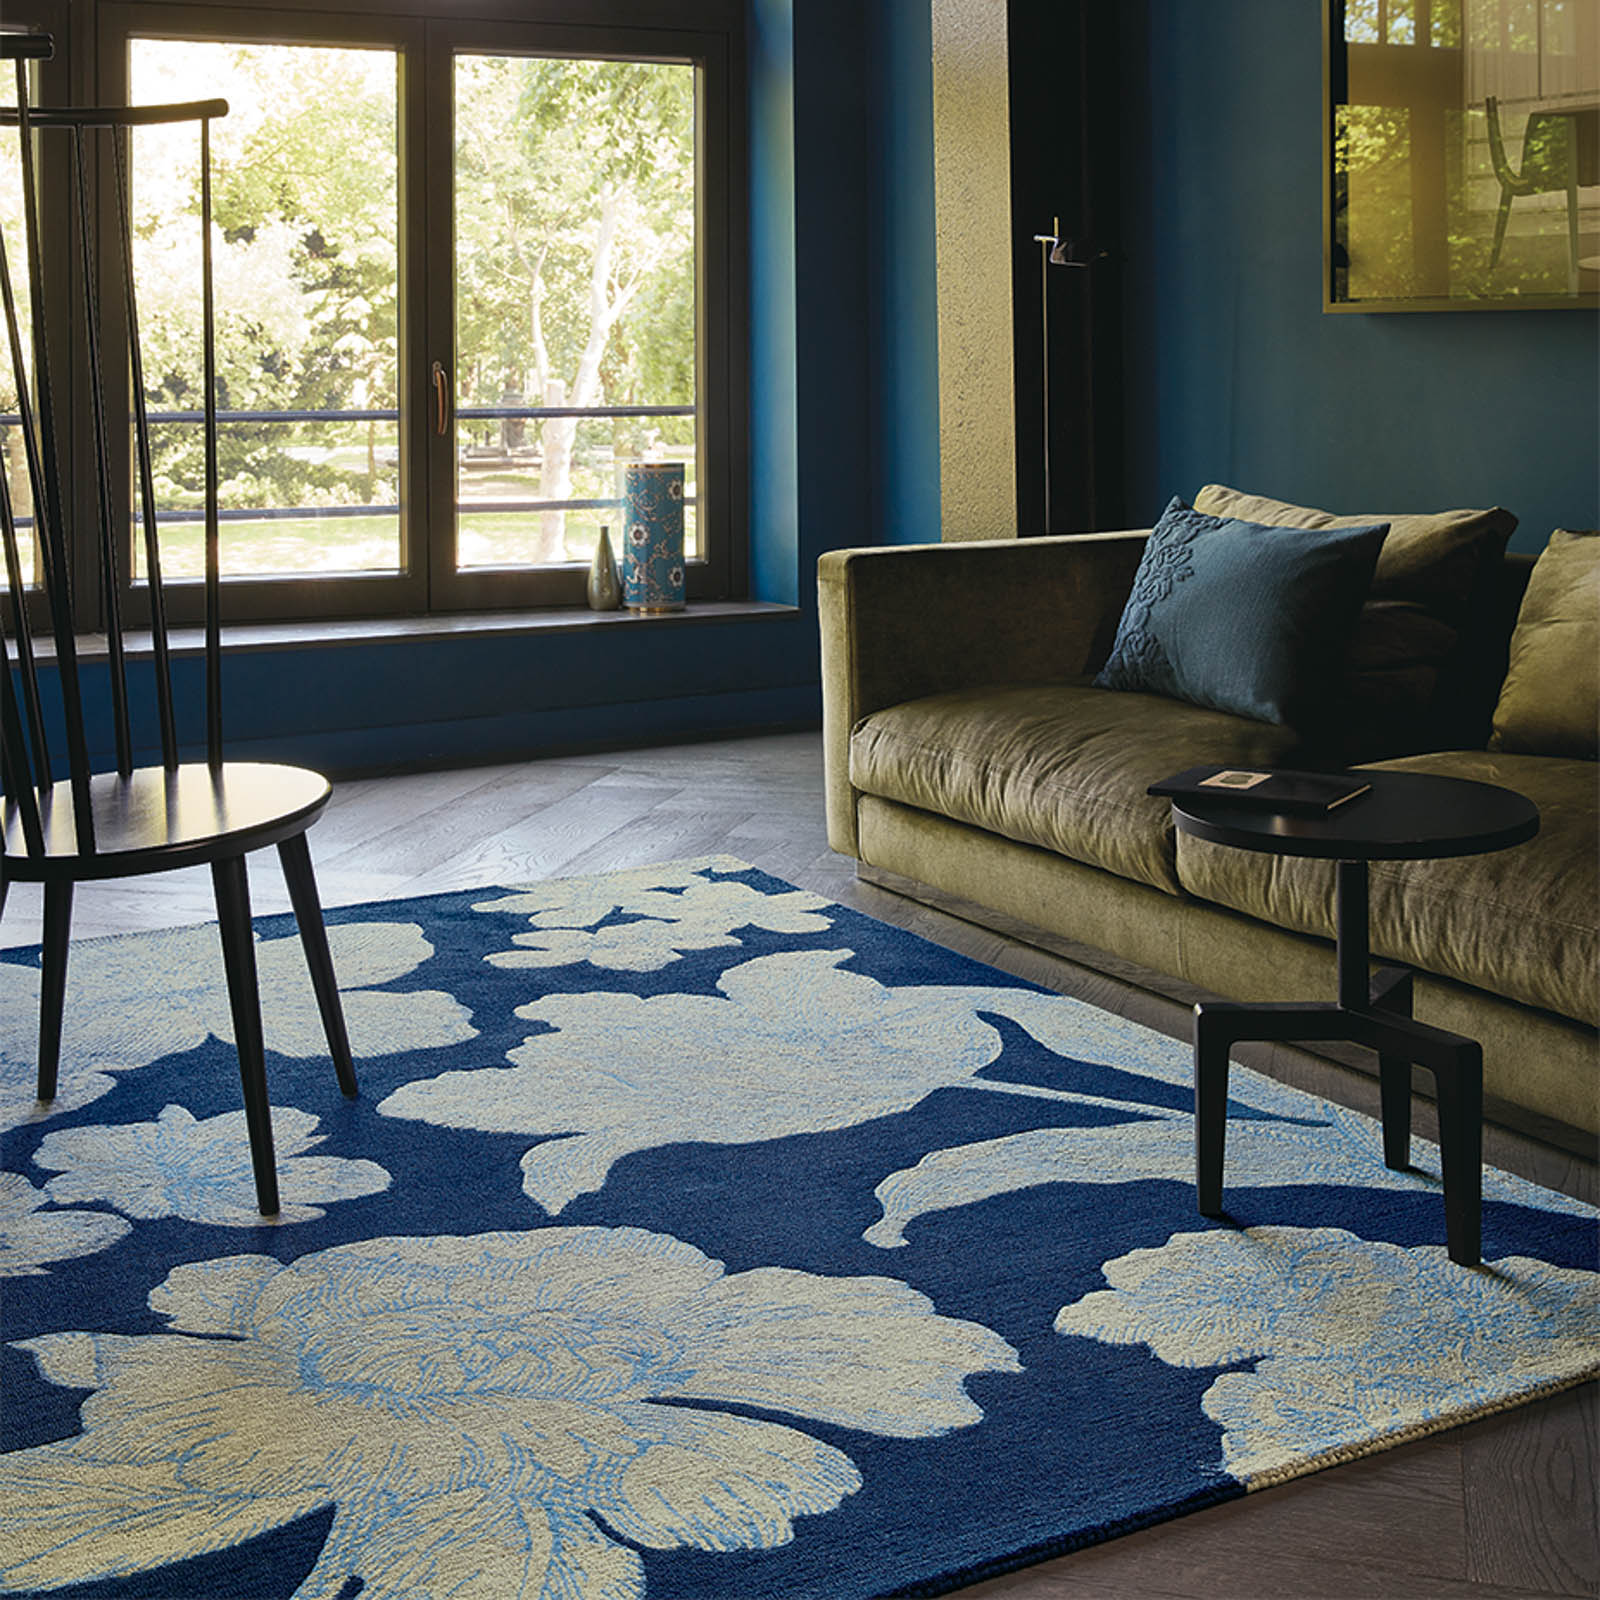 Mother's Day gift, Vibrance Rugs 37408 by Wedgwood